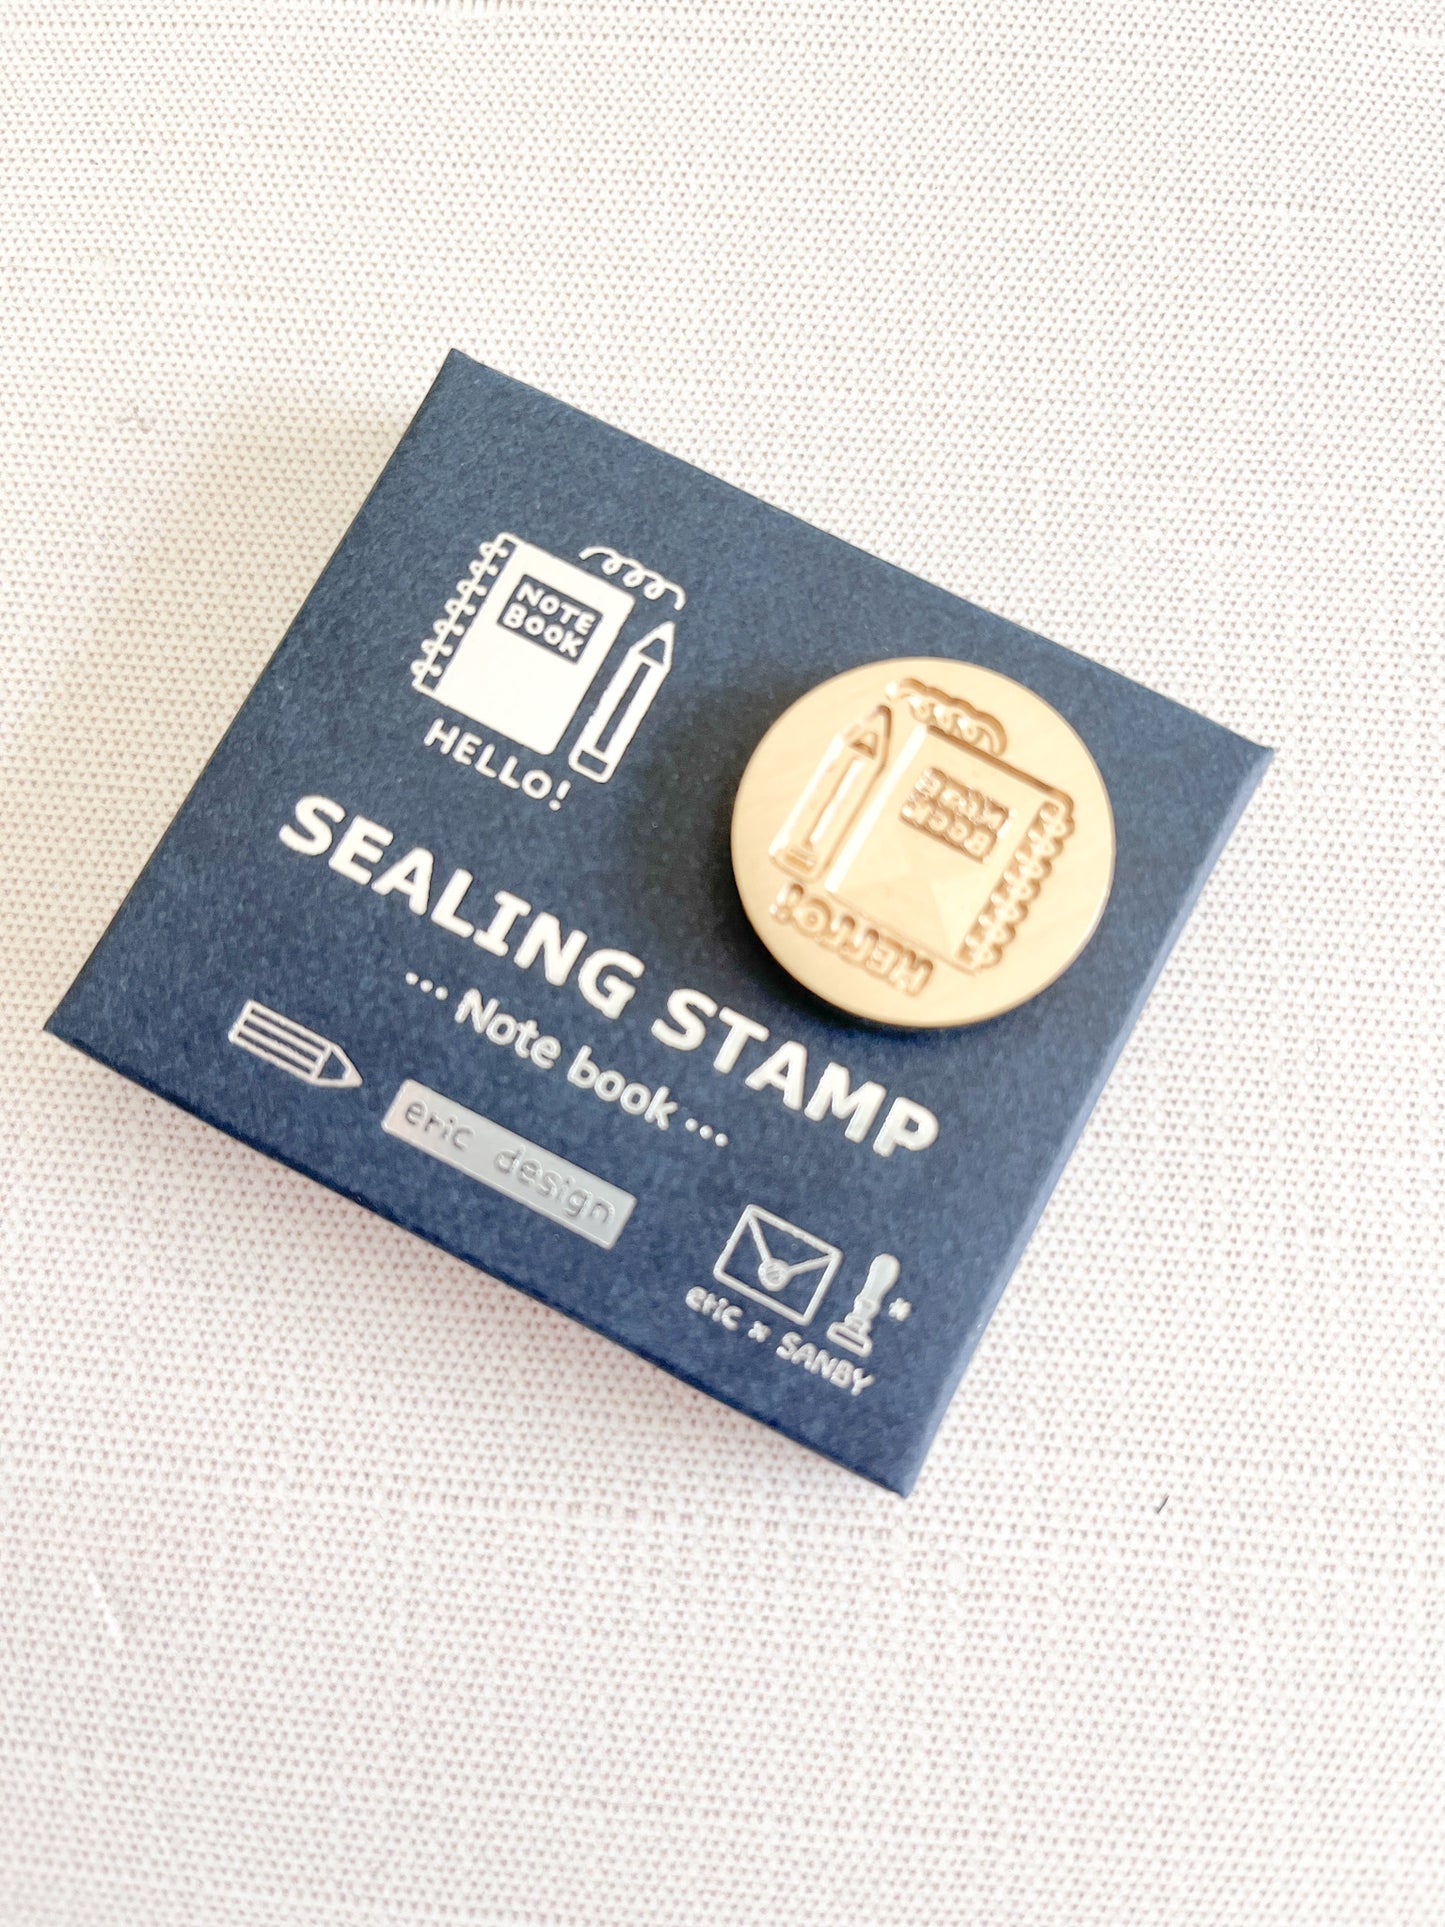 Eric Hello Small Things | Notebook Wax Seal Stamp | eric-sig-stp-03